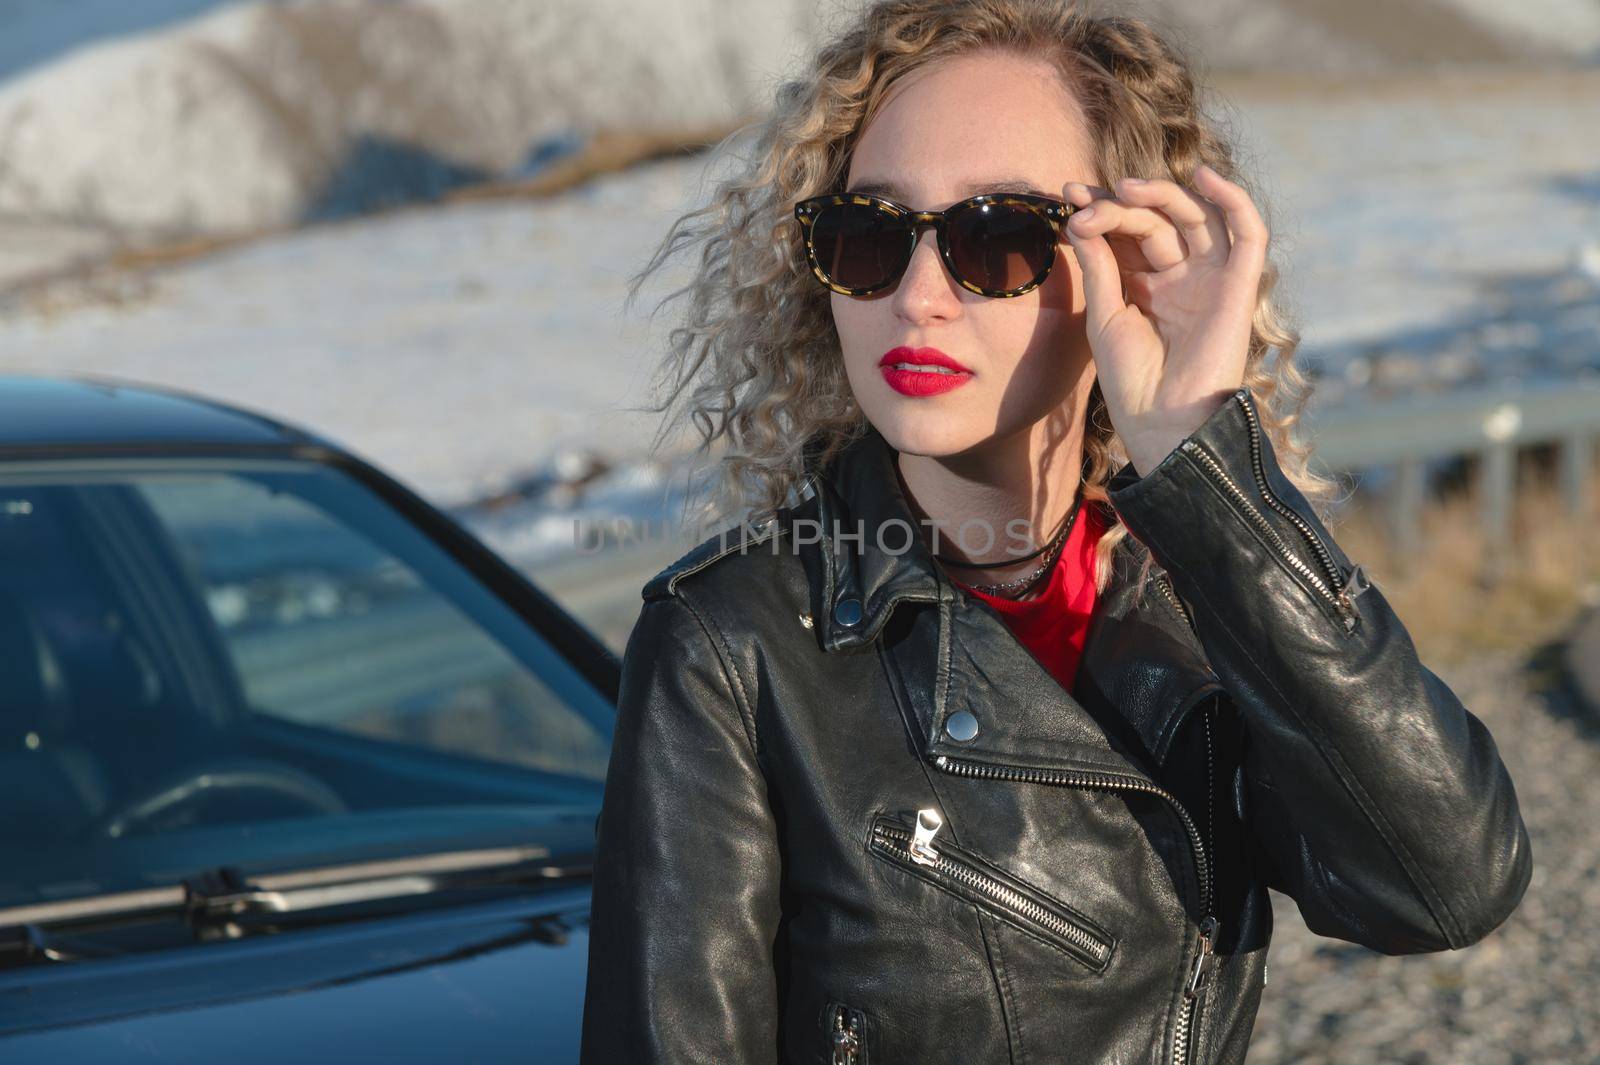 Street fashion portrait of young elegant luxury lady in sunglasses, curly hair and leather jacket posing near retro car. Copy, empty space for text. Holding on to sunglasses in the mountains.